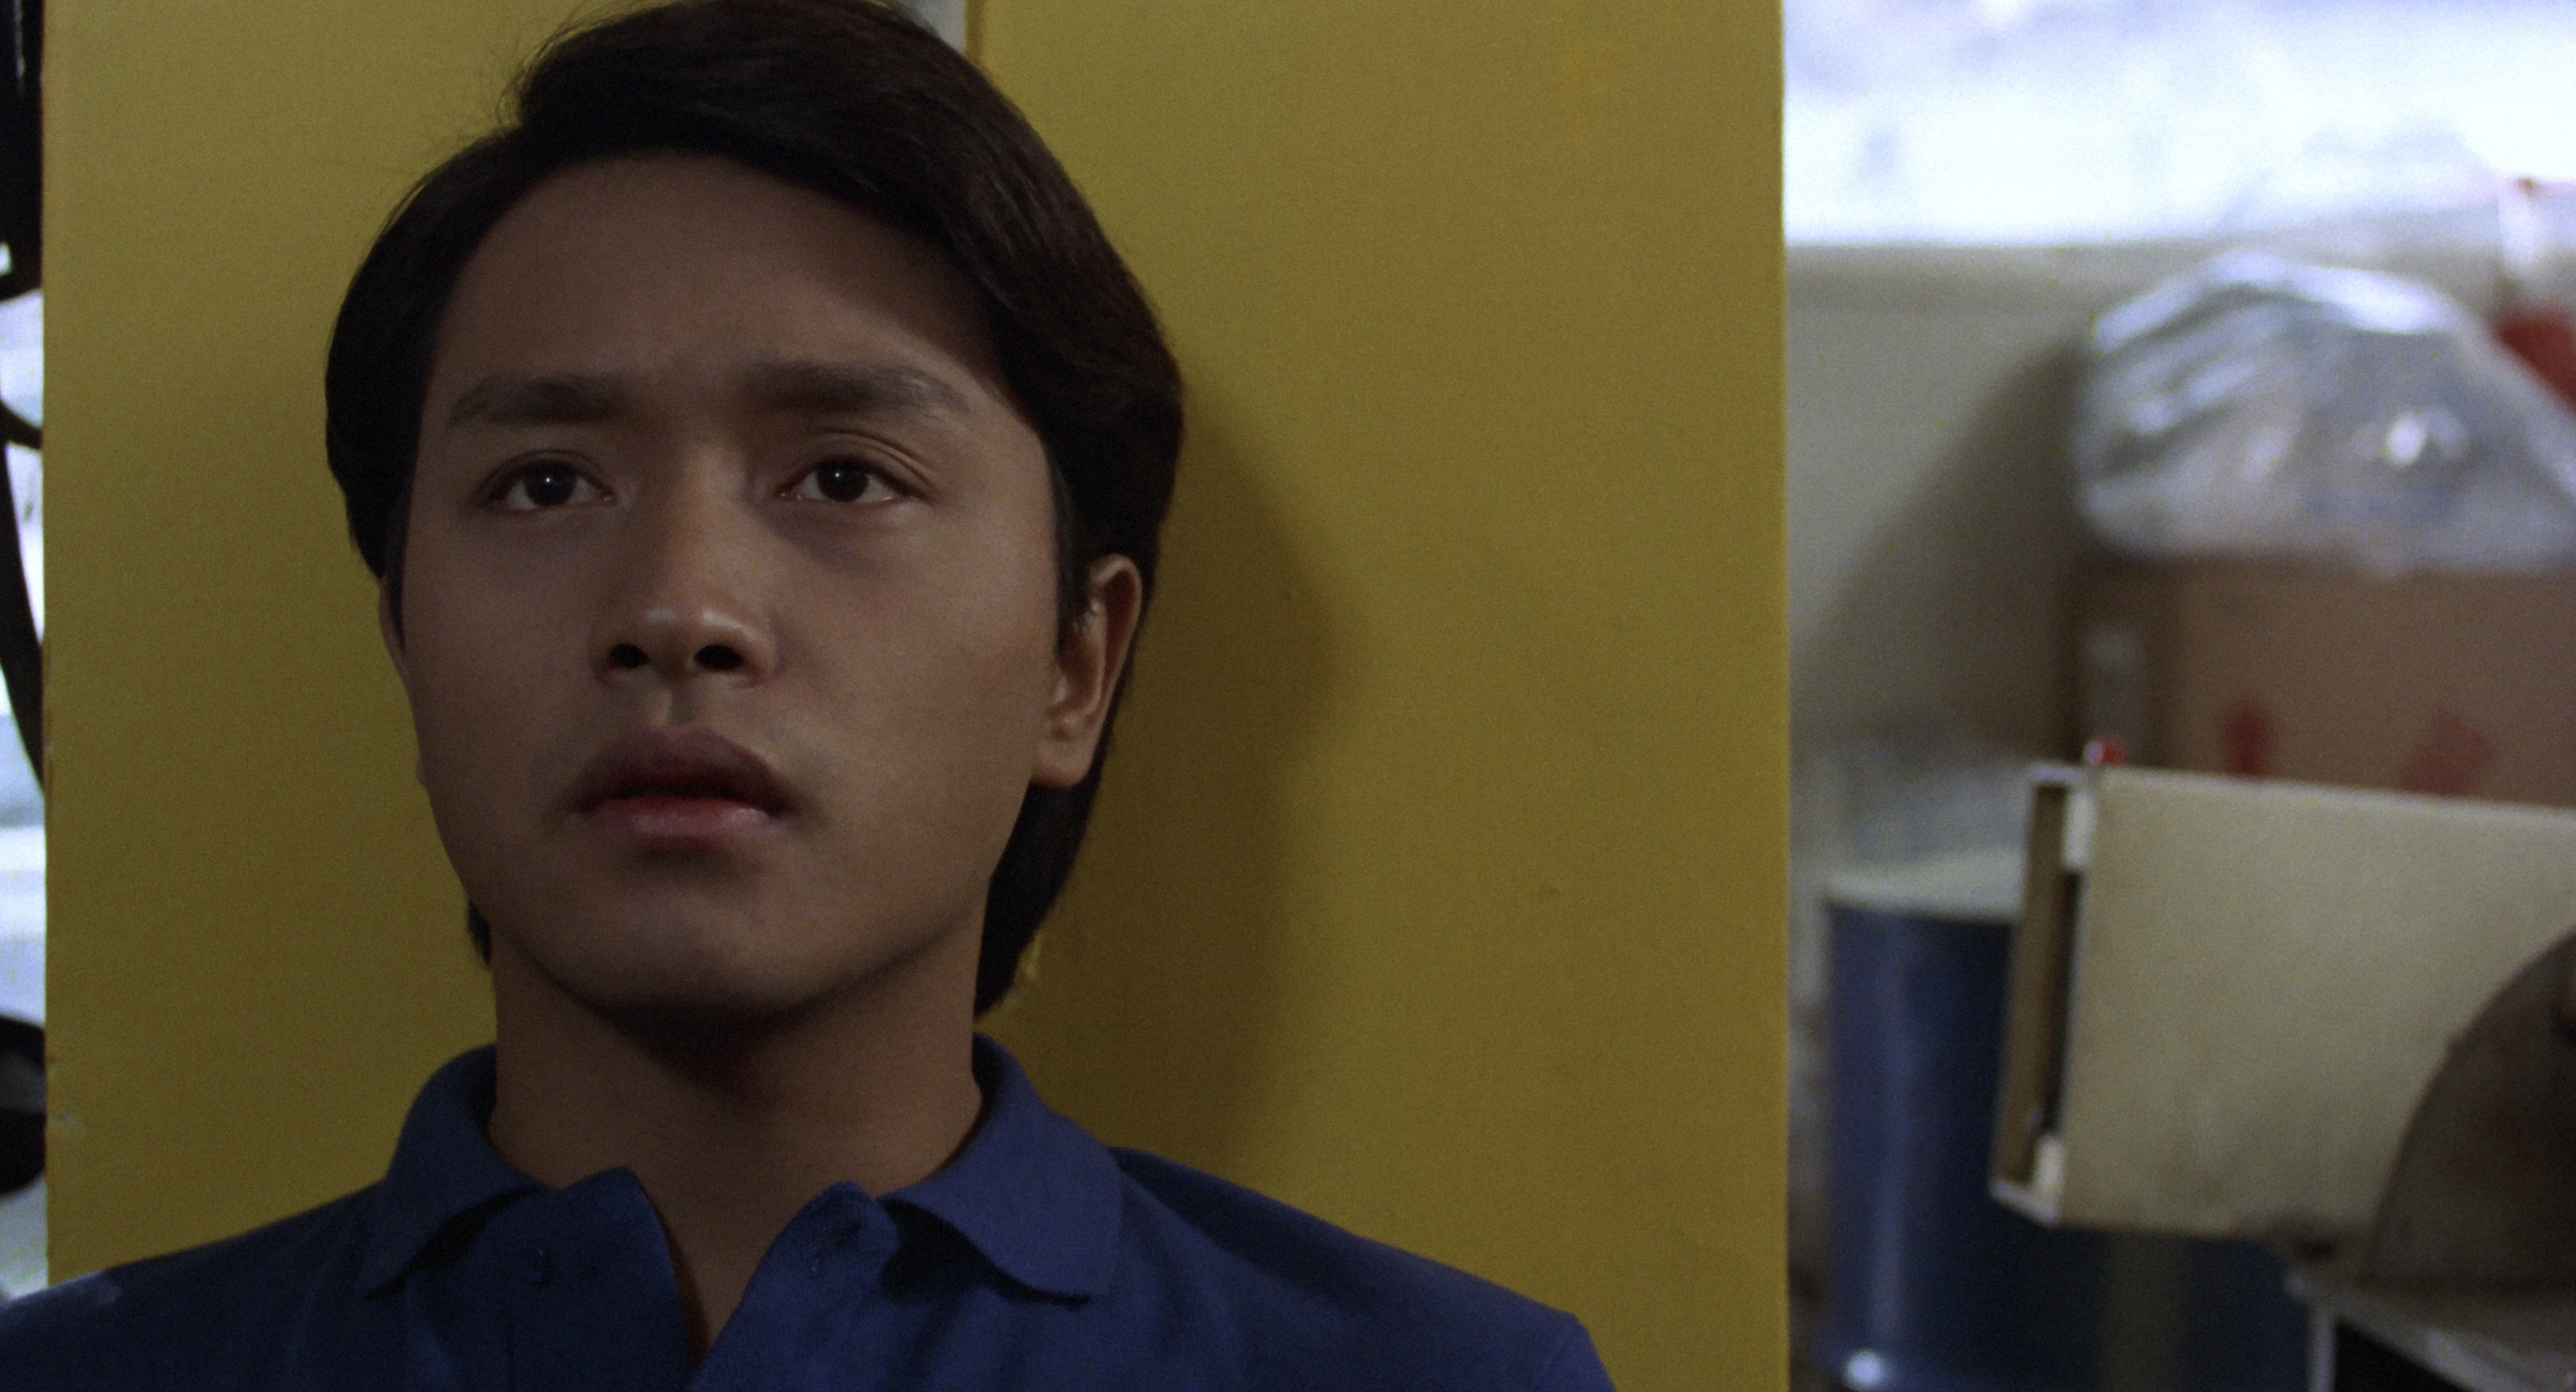 Leslie Cheung in a still from “Nomad”, directed by Patrick Tam.